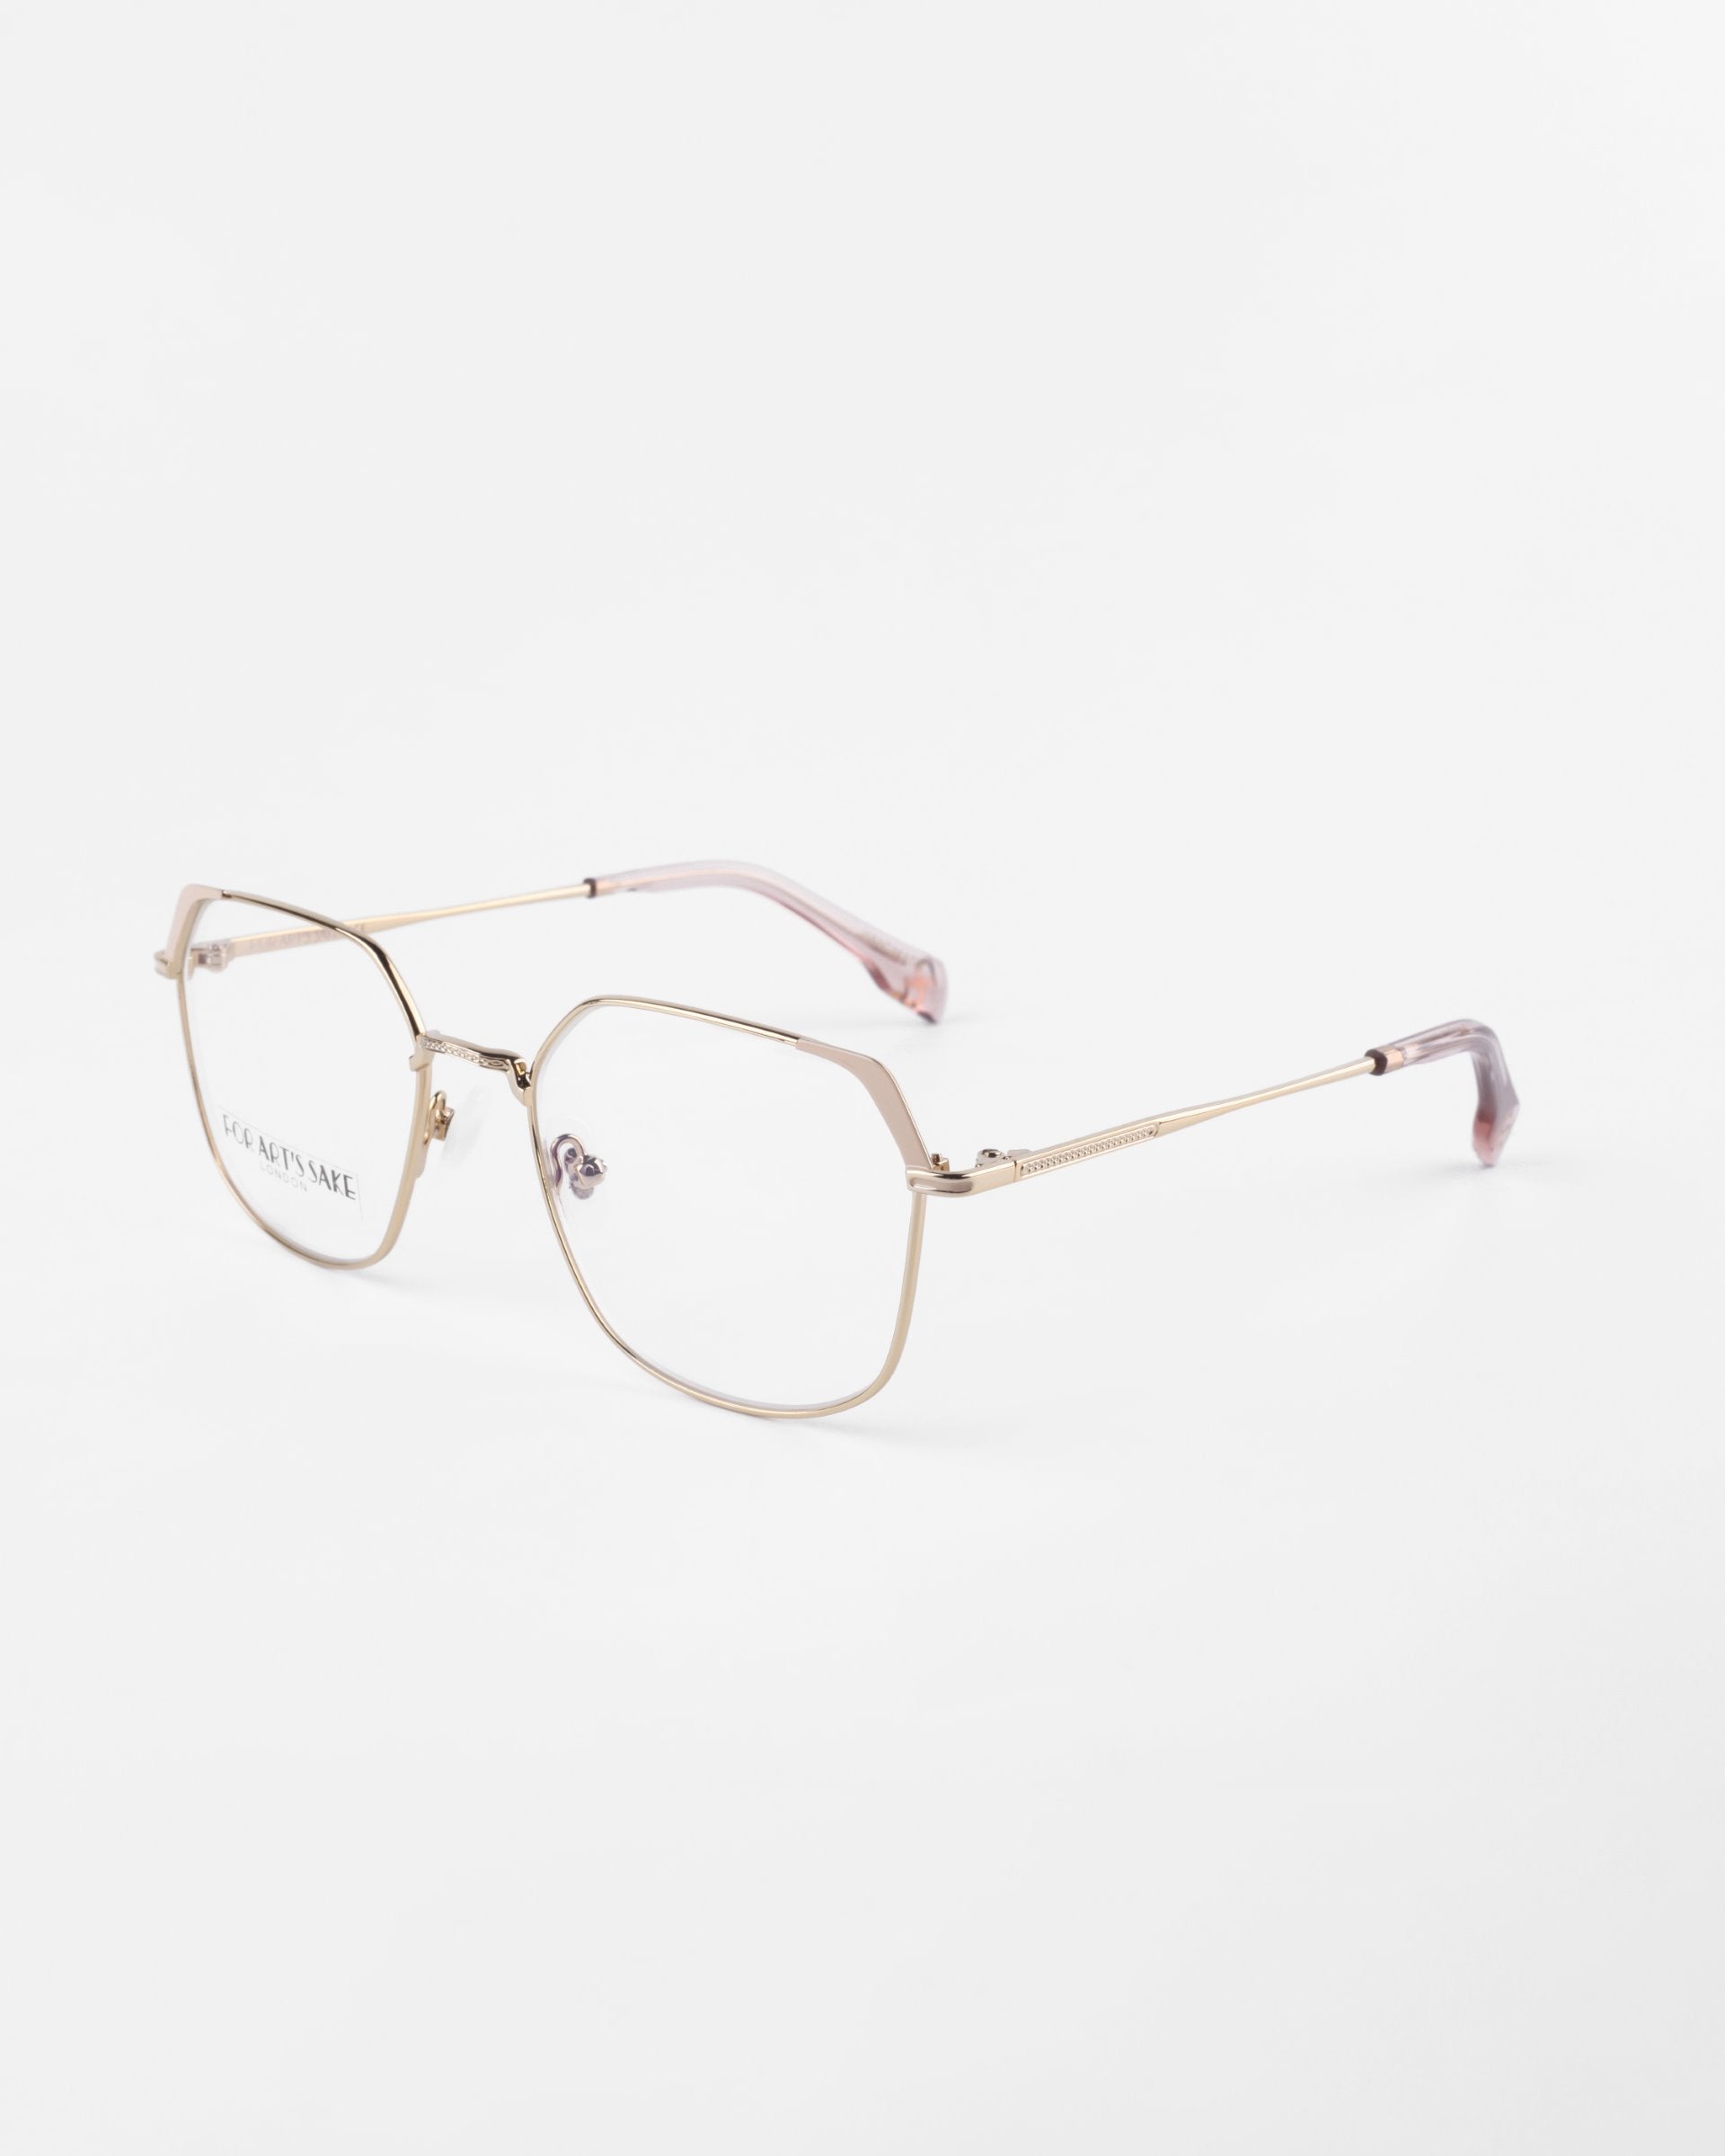 A pair of modern eyeglasses with thin, gold metal frames and clear prescription lenses featuring a blue light filter. The temples are straight with a subtle curve near the ends, which are covered with pinkish-brown tips. The white background highlights the sleek and minimalist design of the Godiva glasses by For Art&#39;s Sake®.